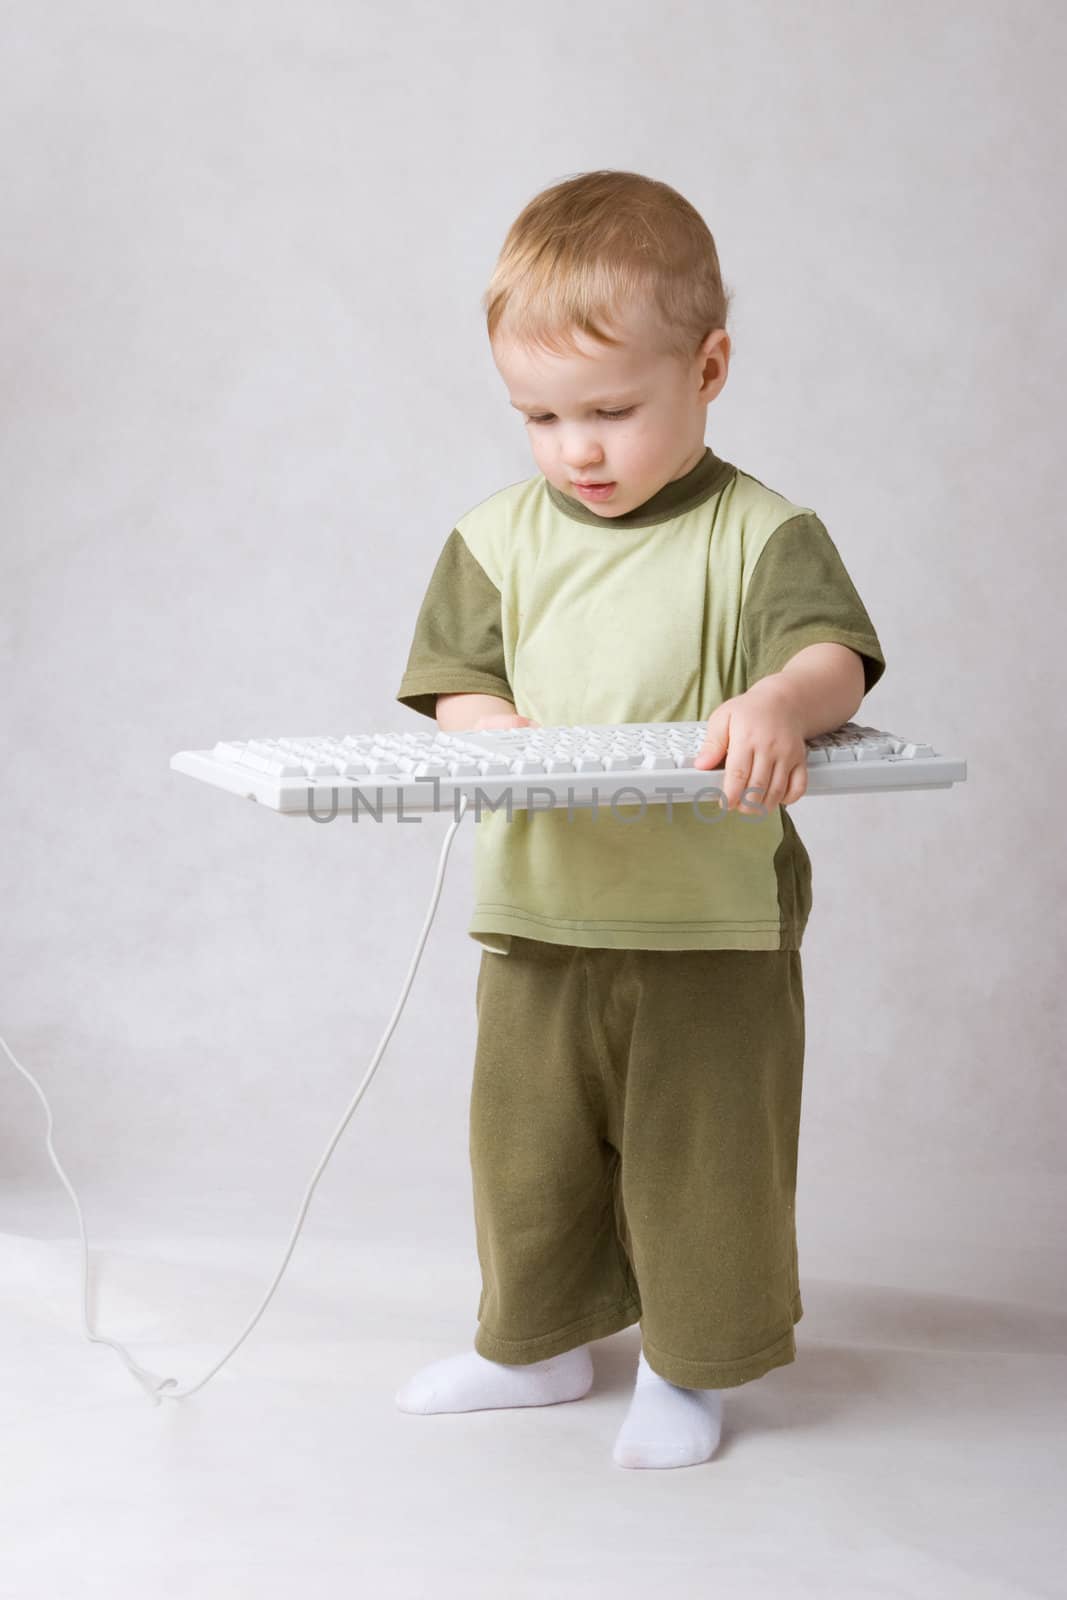 small boy with a keyboard in hands